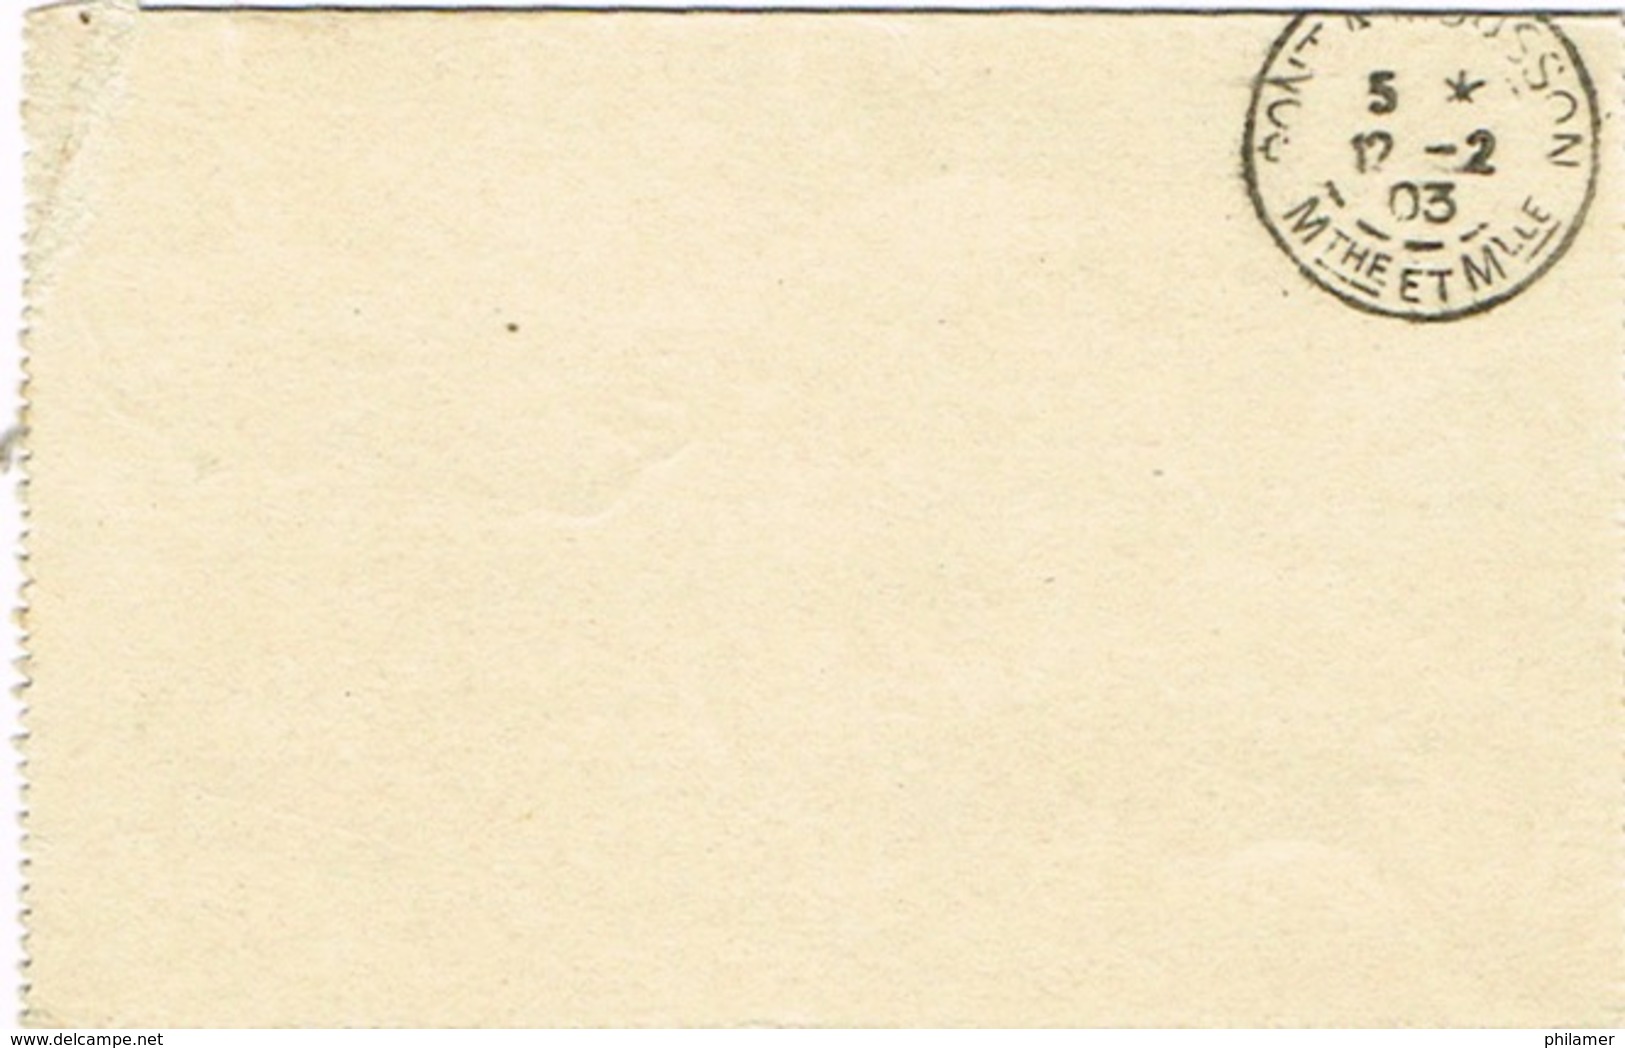 France Entier Postal Stationery Carte Lettre Cad Nacy A Epernay Via Pont A Mousson 1903 BE - Cartes-lettres